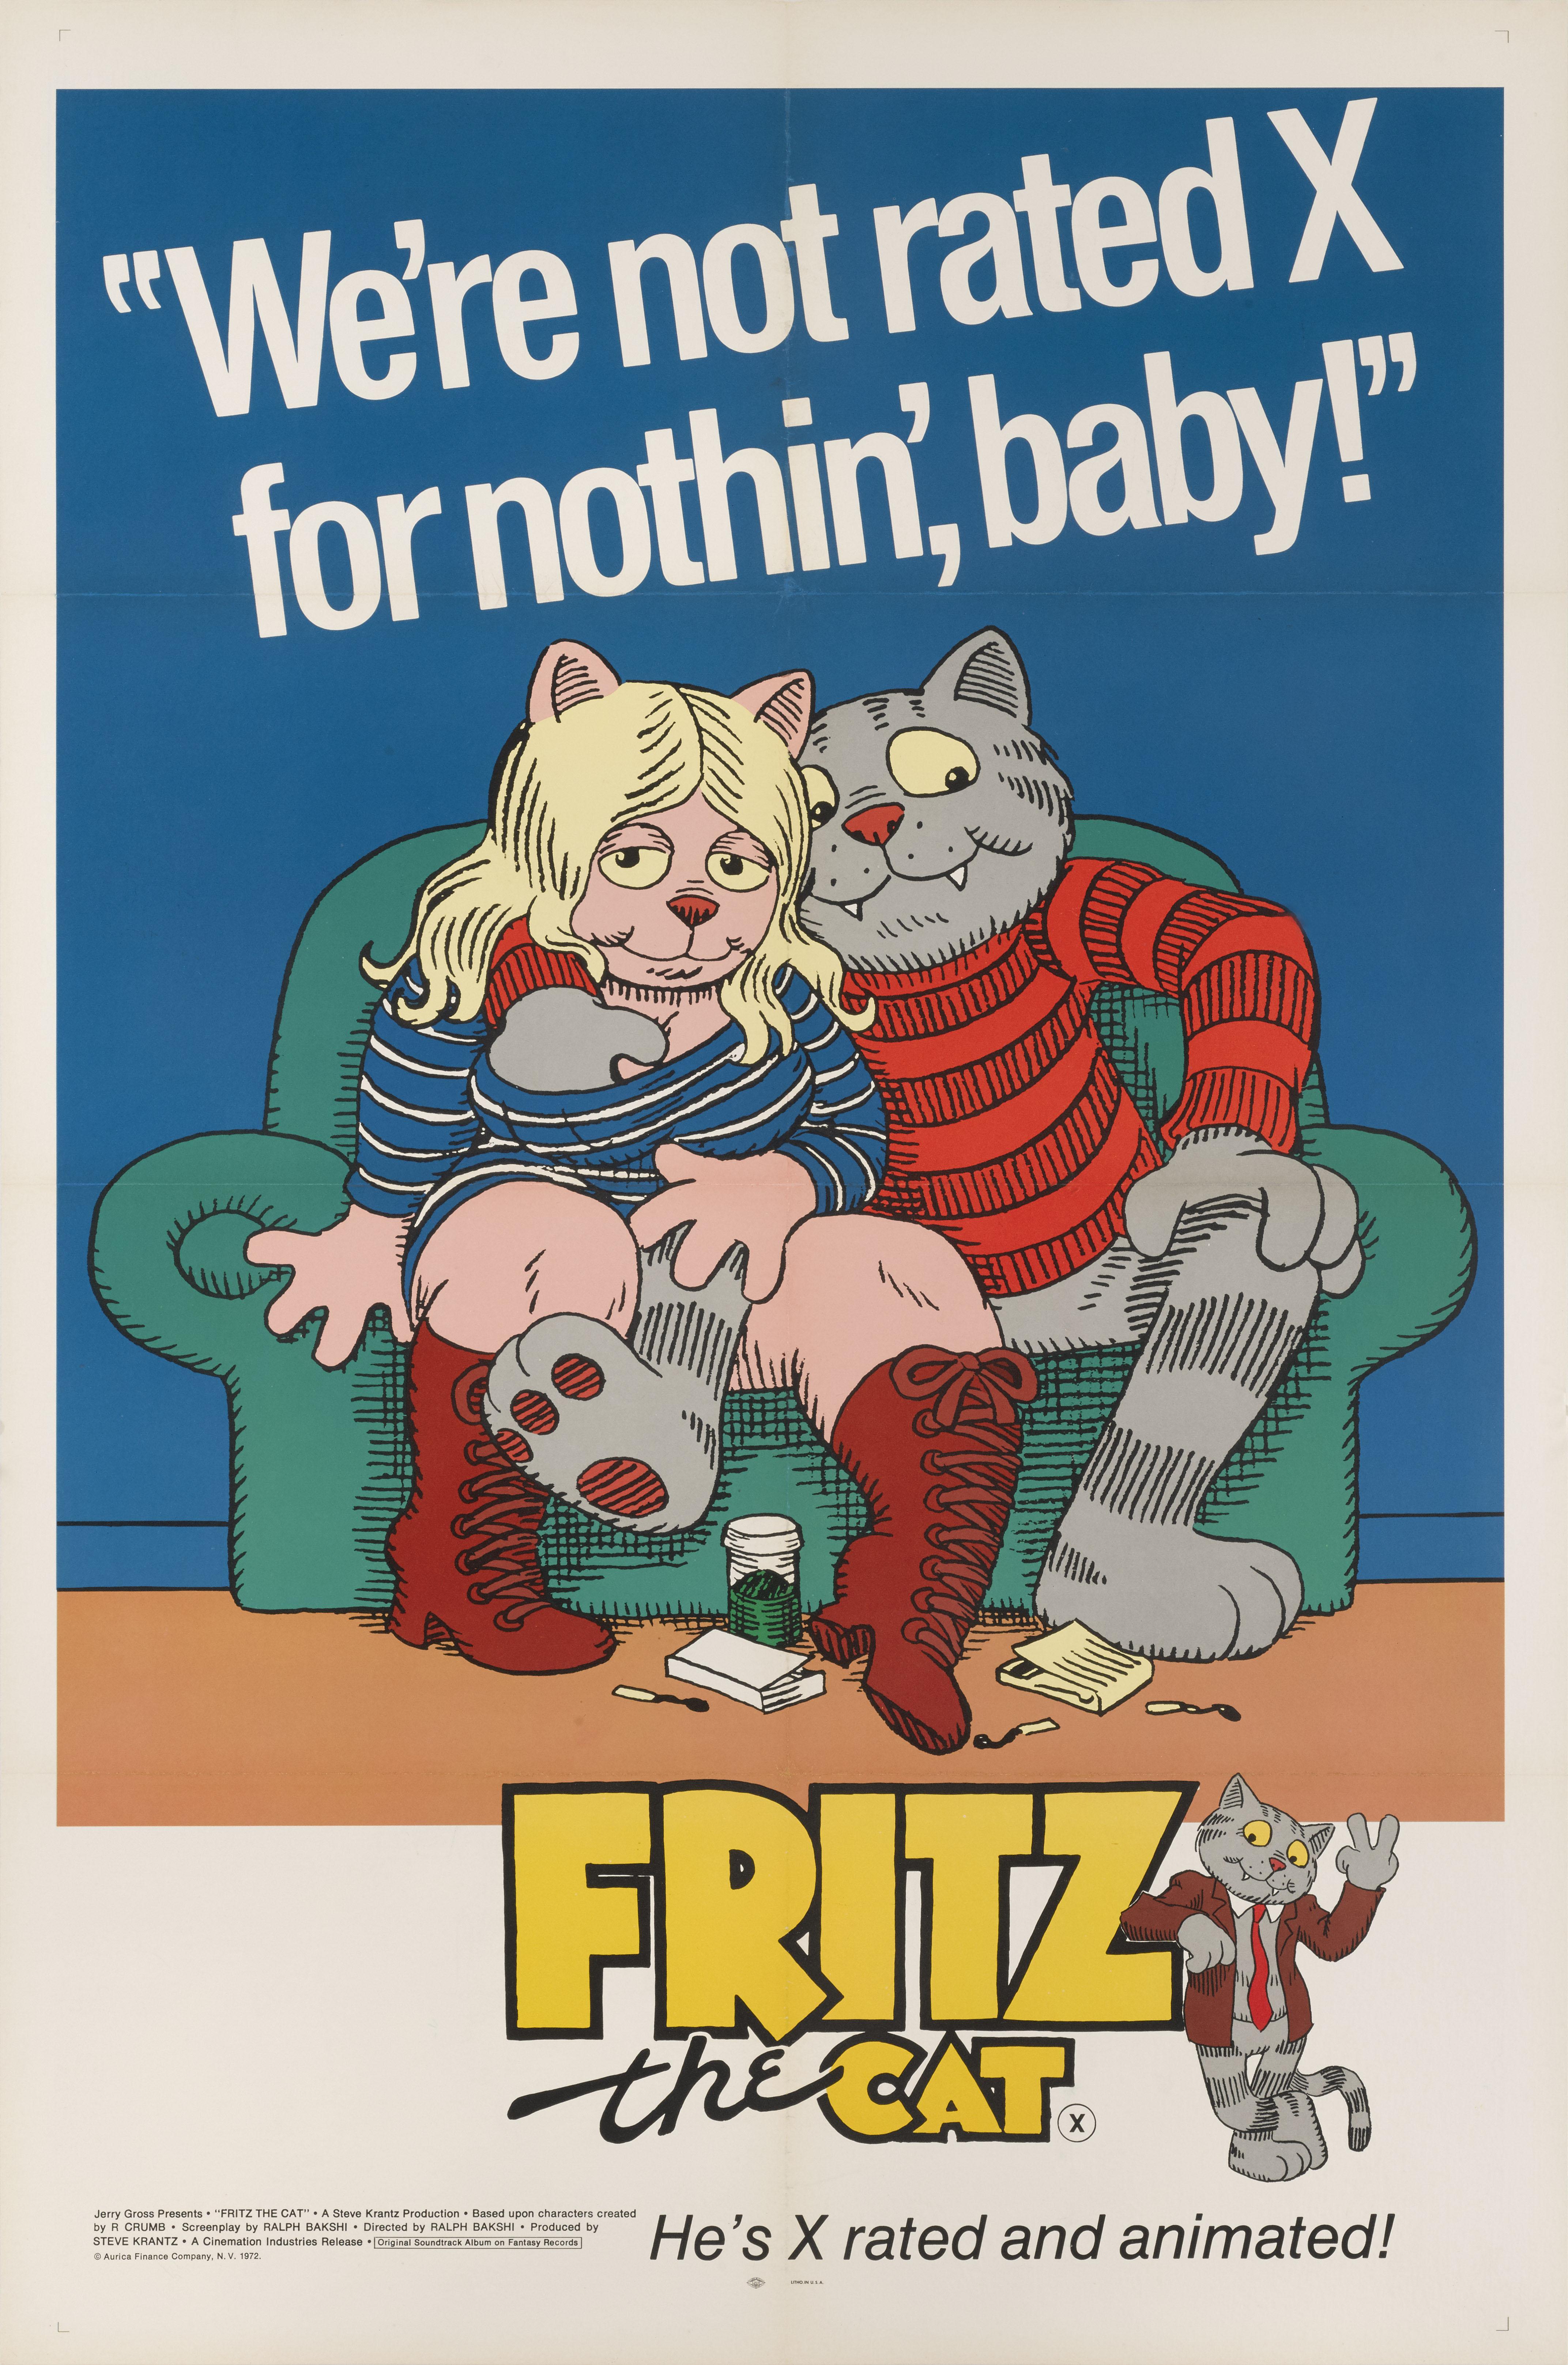 Original US film poster for the 1972 X rated Animation.
This film was written and directed by Ralph Bakshi
The art work on this poster is by Robert Crumb (b.1943)
This poster is conservation linen backed and it would be shipped rolled in a very